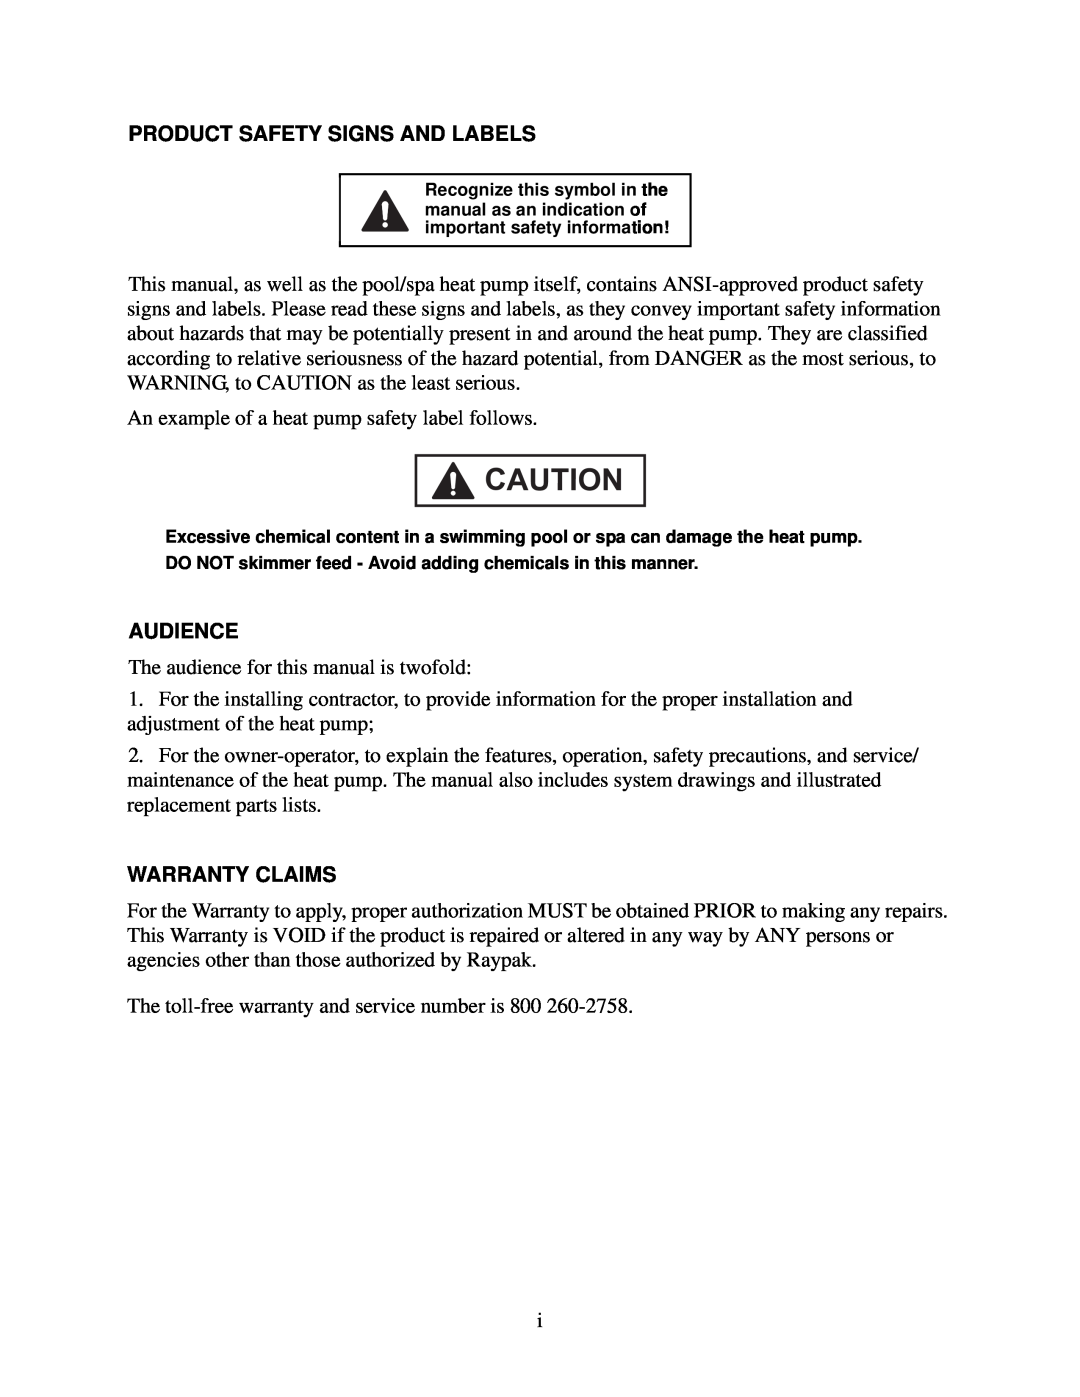 Raypak 6100, 5100 owner manual Product Safety Signs And Labels, Audience, Warranty Claims 